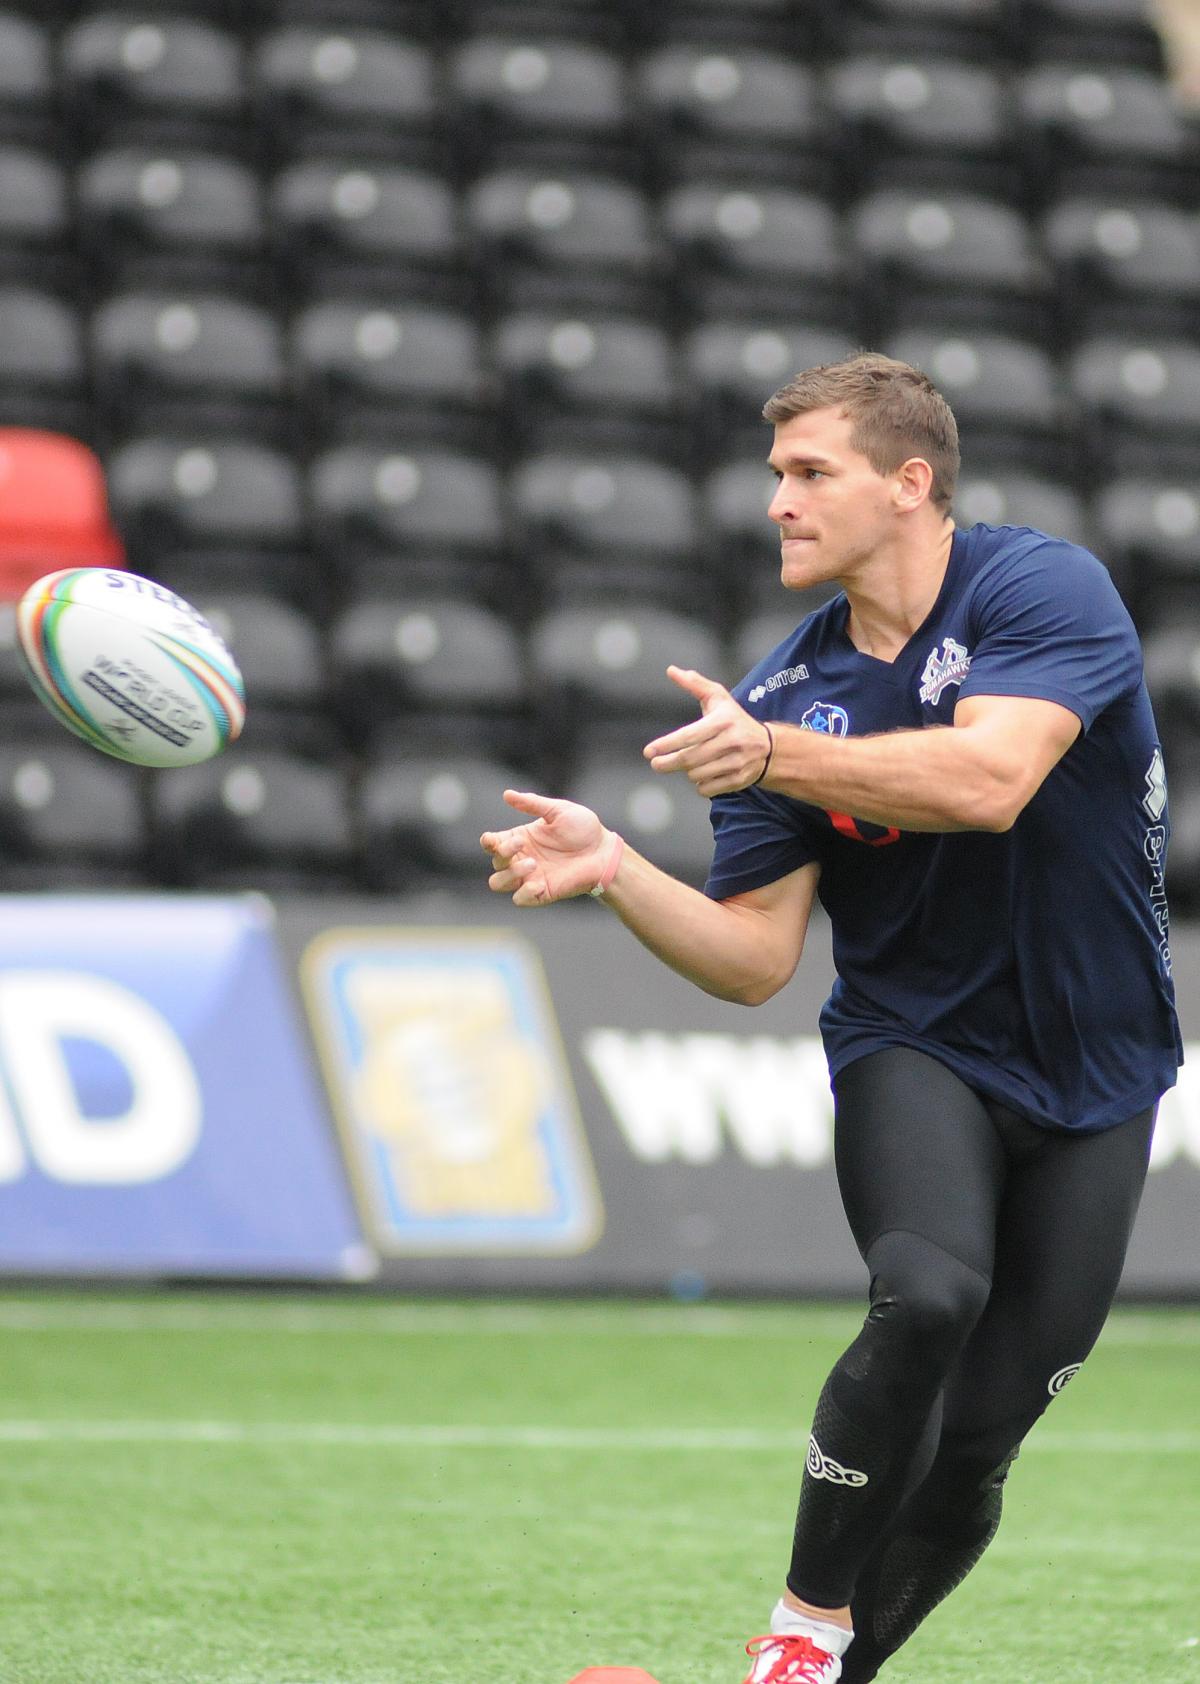 USA World Cup training session at Security Select Stadium in Widnes - Taylor Welch